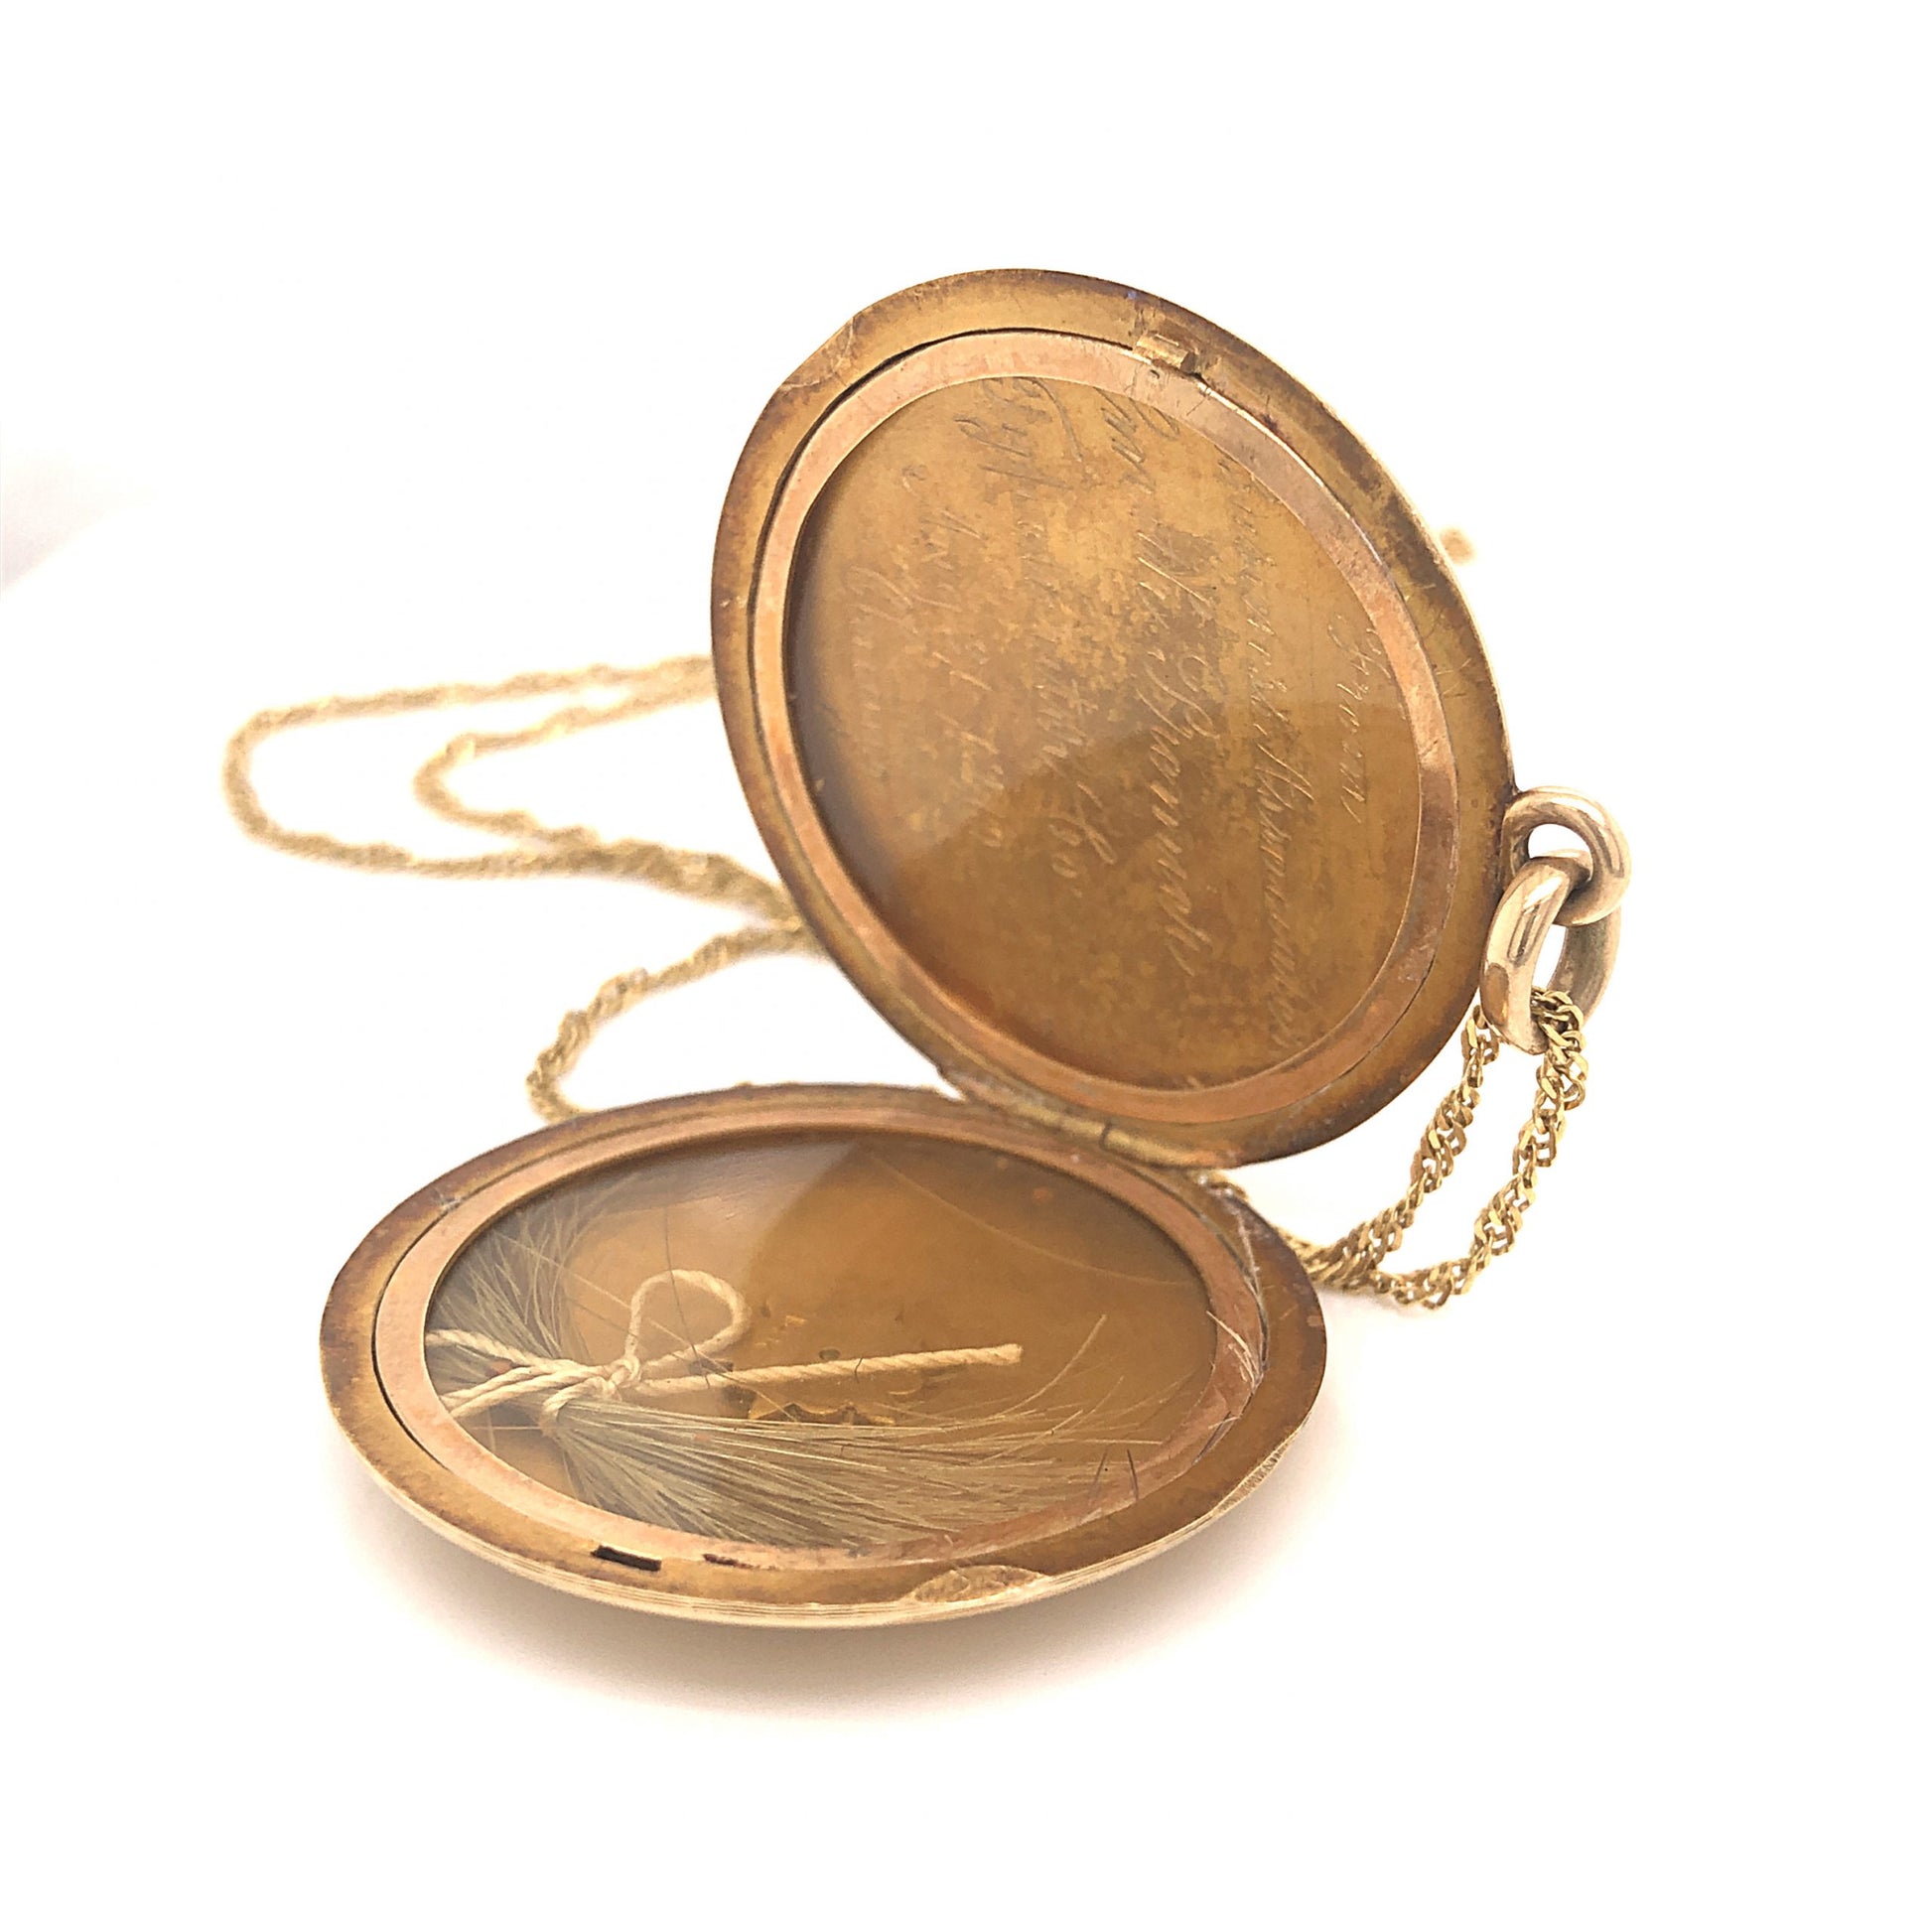 Victorian Engraved Round Locket Necklace in 14k Yellow GoldComposition: 14 Karat Yellow Gold Total Gram Weight: 16.3 g Inscription: 14k, From Business Associates Smith Premier Typewriter Co to Amy 31 - 1910 Chicago
      